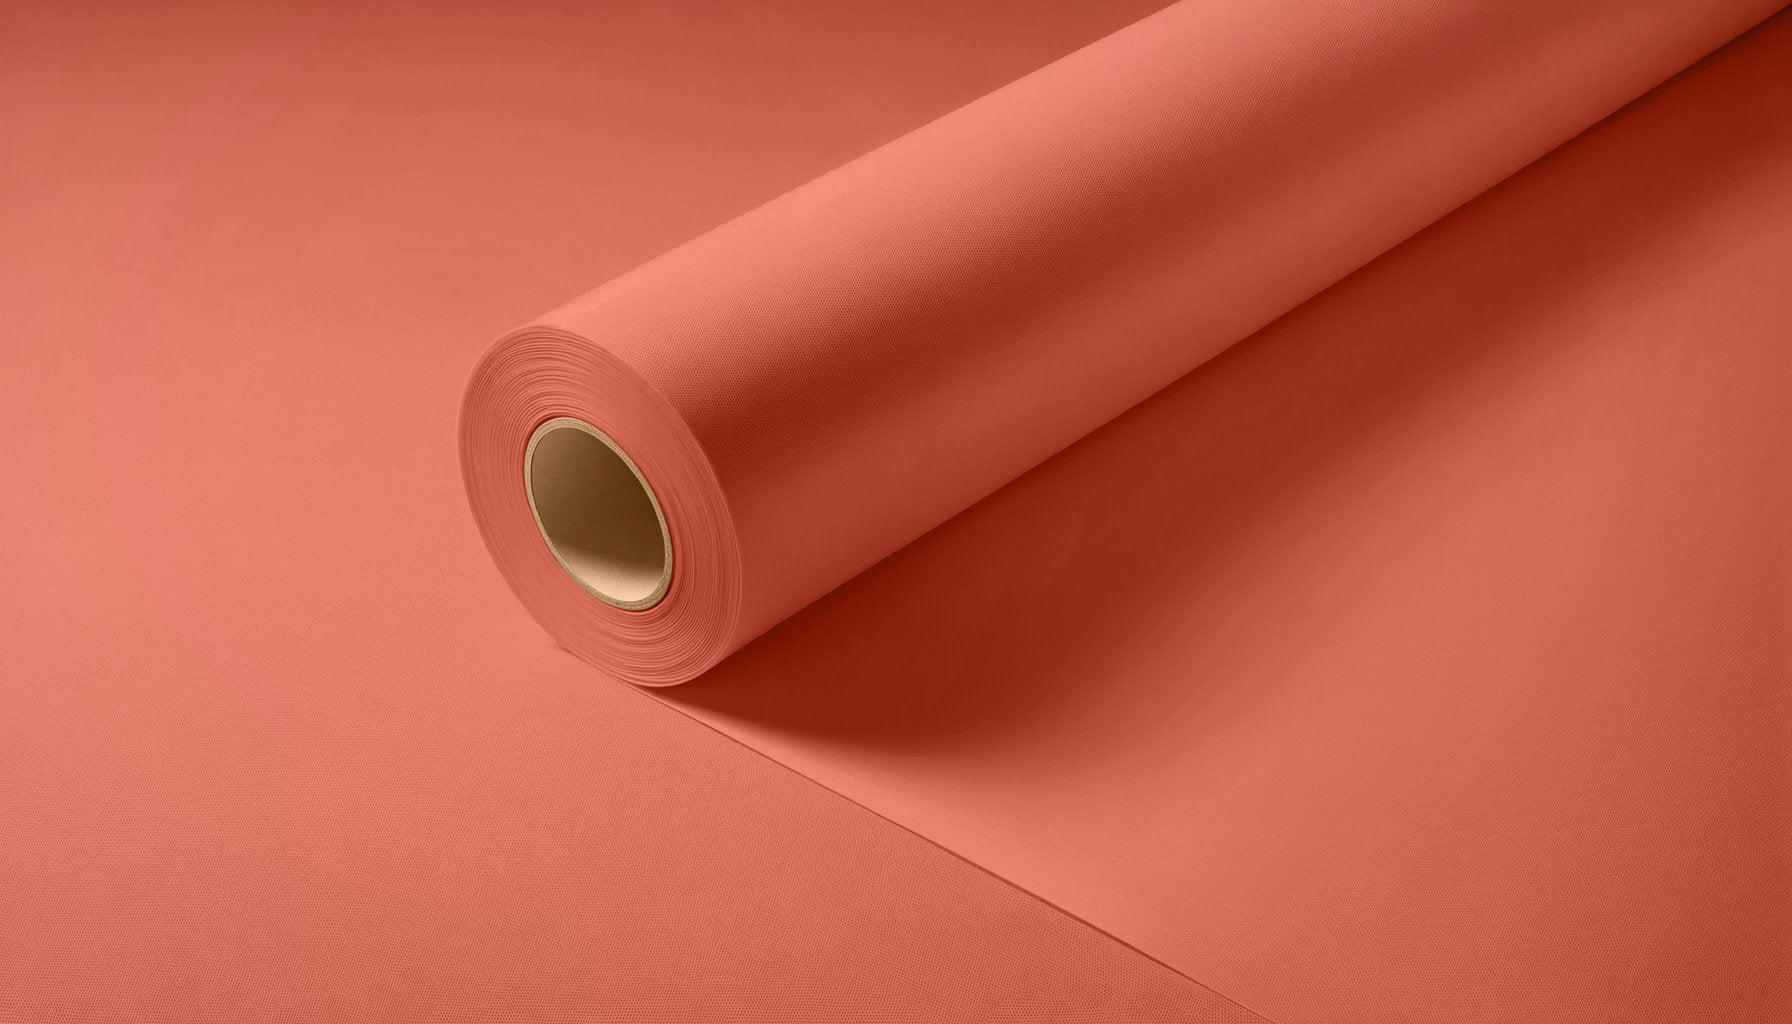 Peel & Stick Removable Re-usable Paint - Color RAL 3022 Salmon Pink - offRAL™ - RALRAW LLC, USA